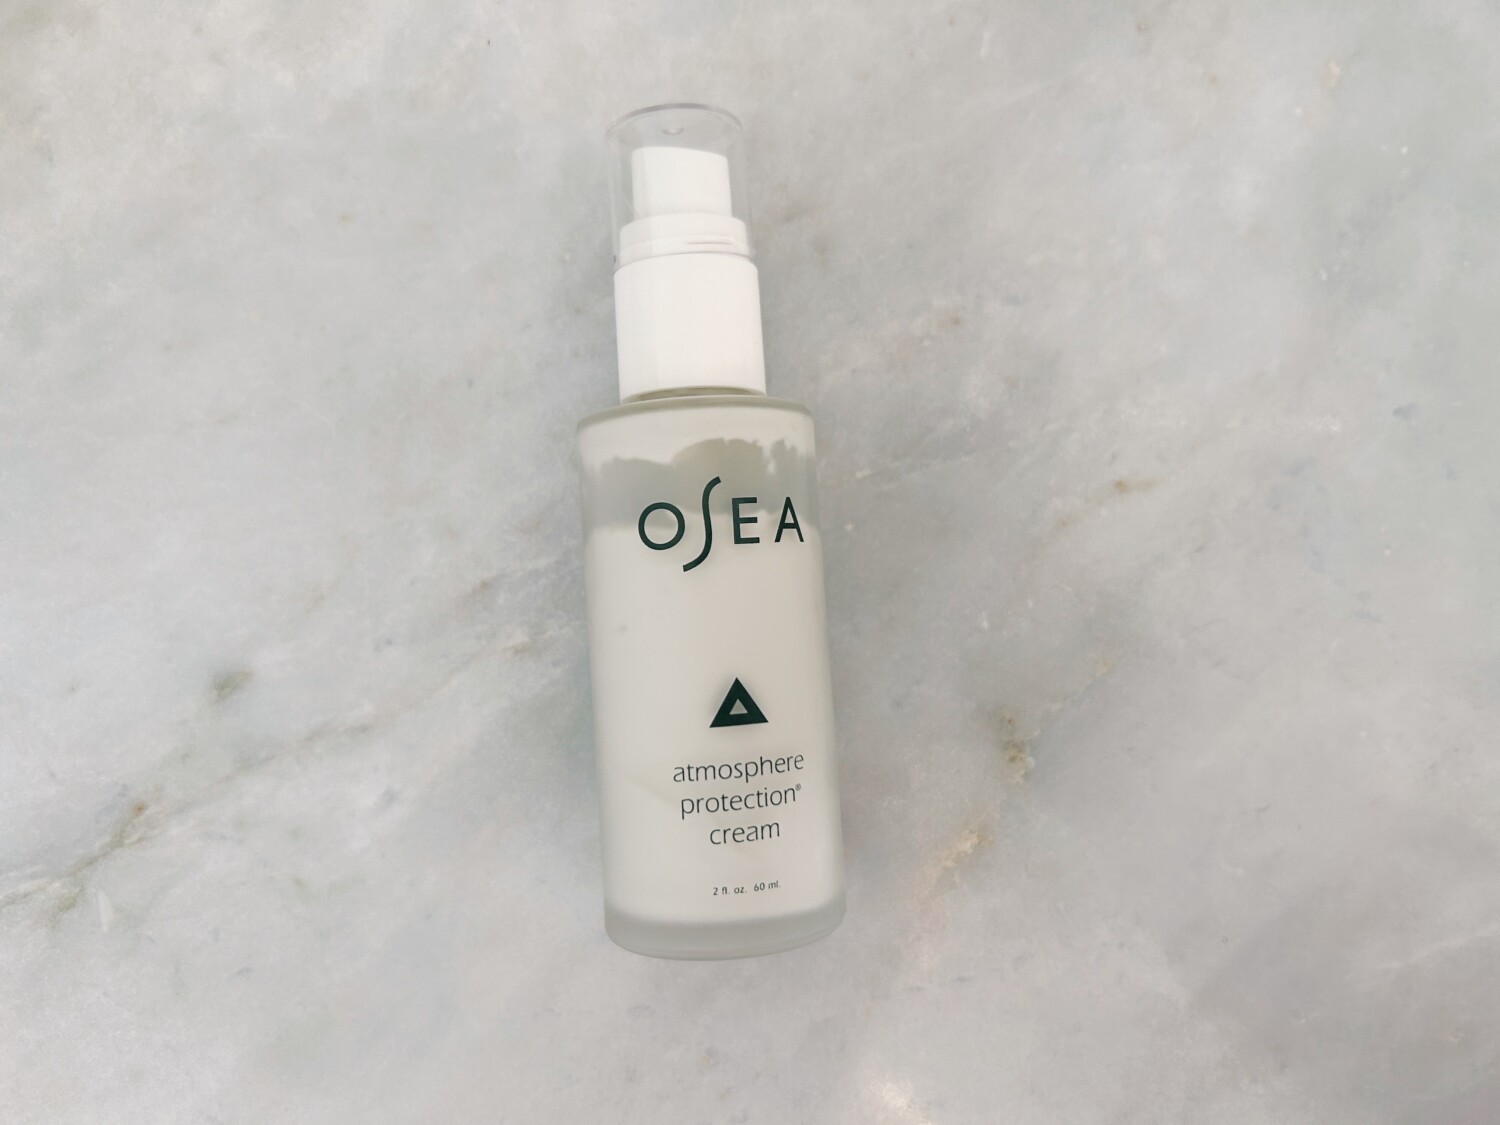 Atmosphere Protection Cream | Osea Skincare Review